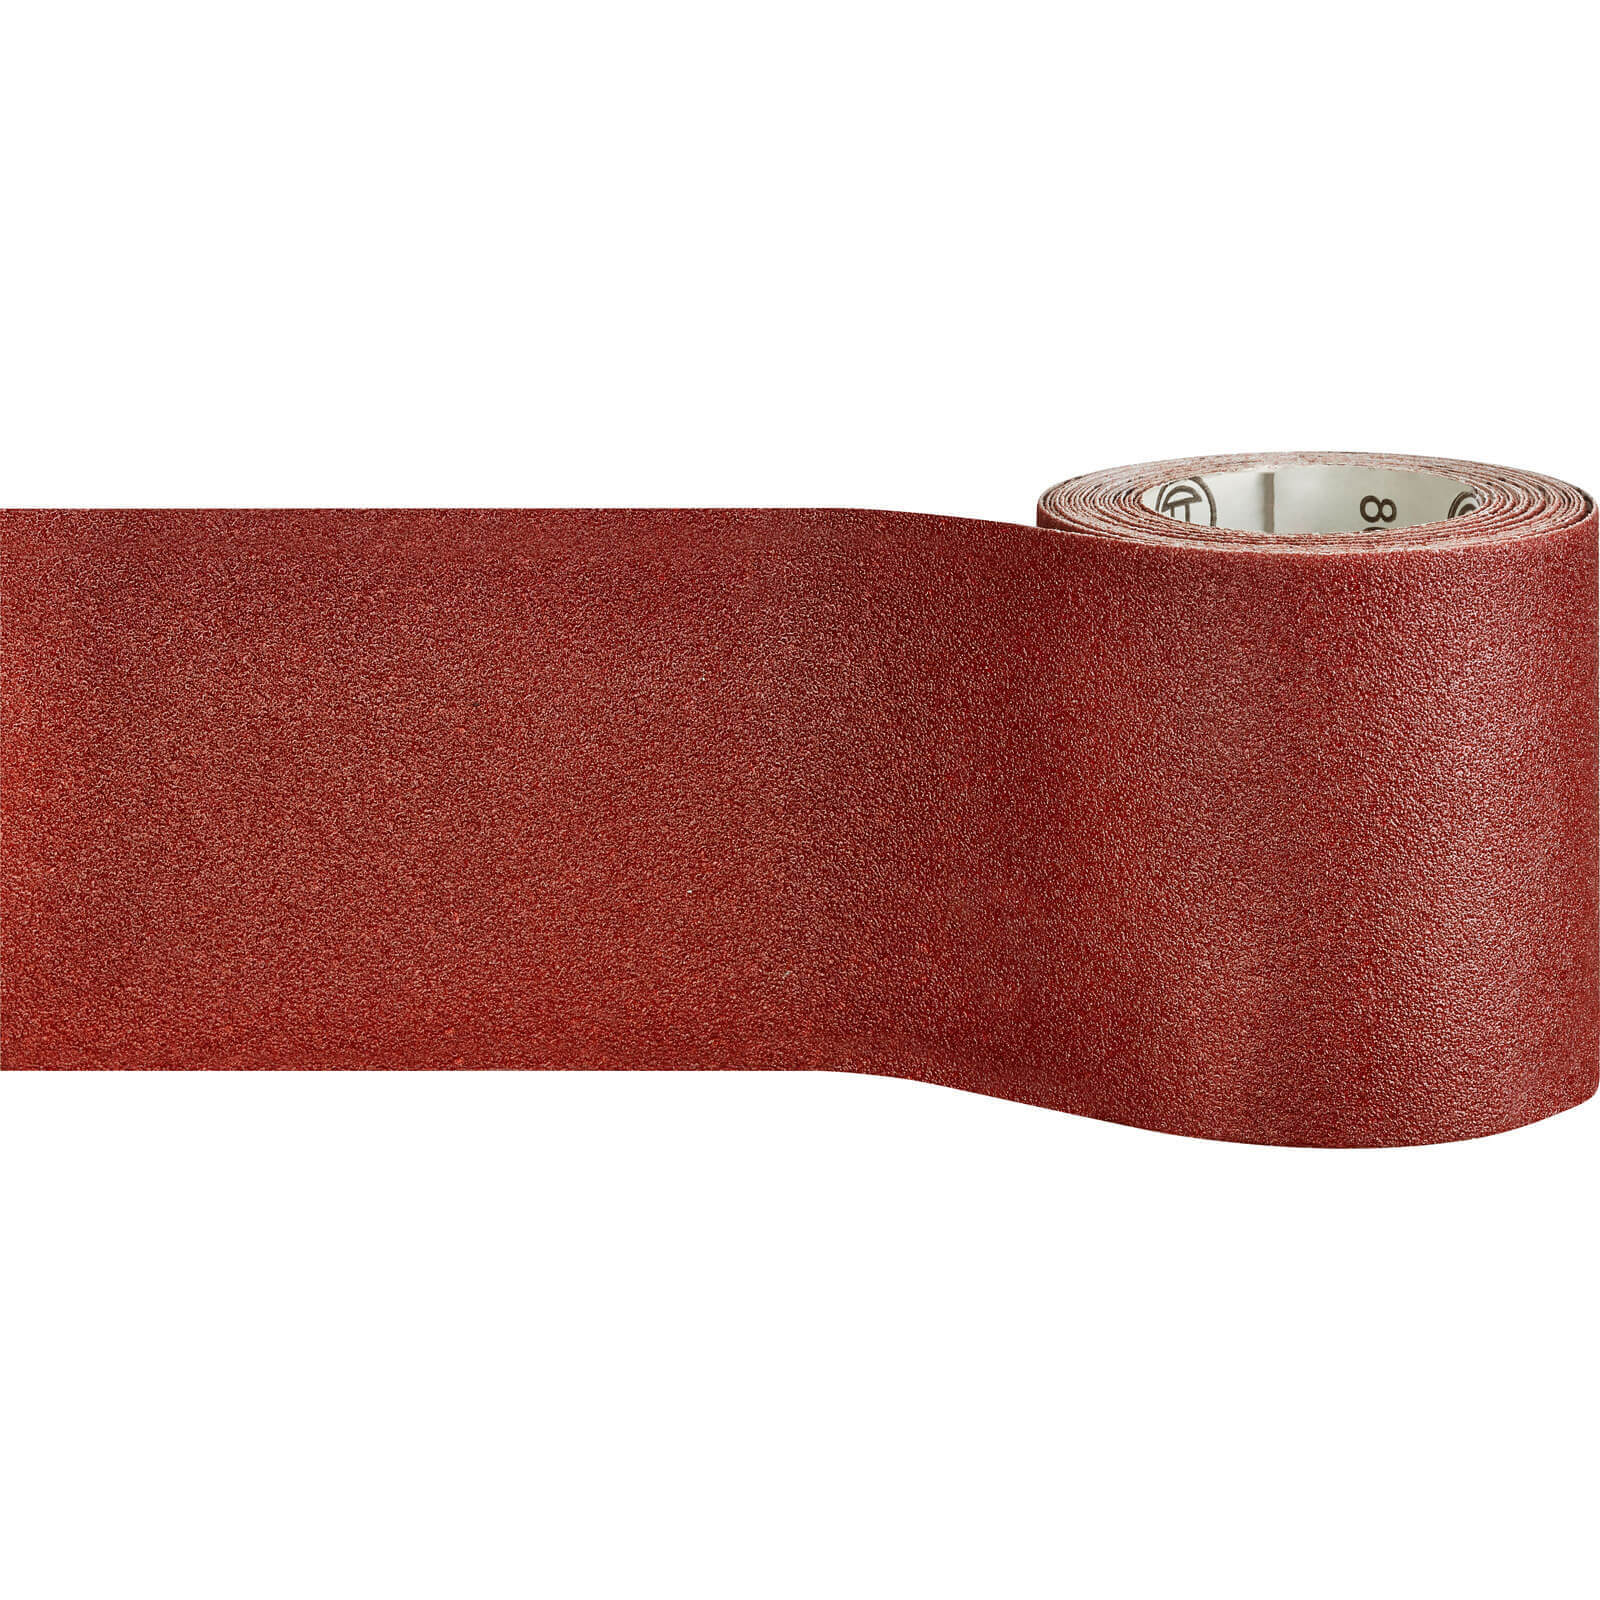 Image of Bosch Sanding Roll Red for Wood 115mm 5m 40g